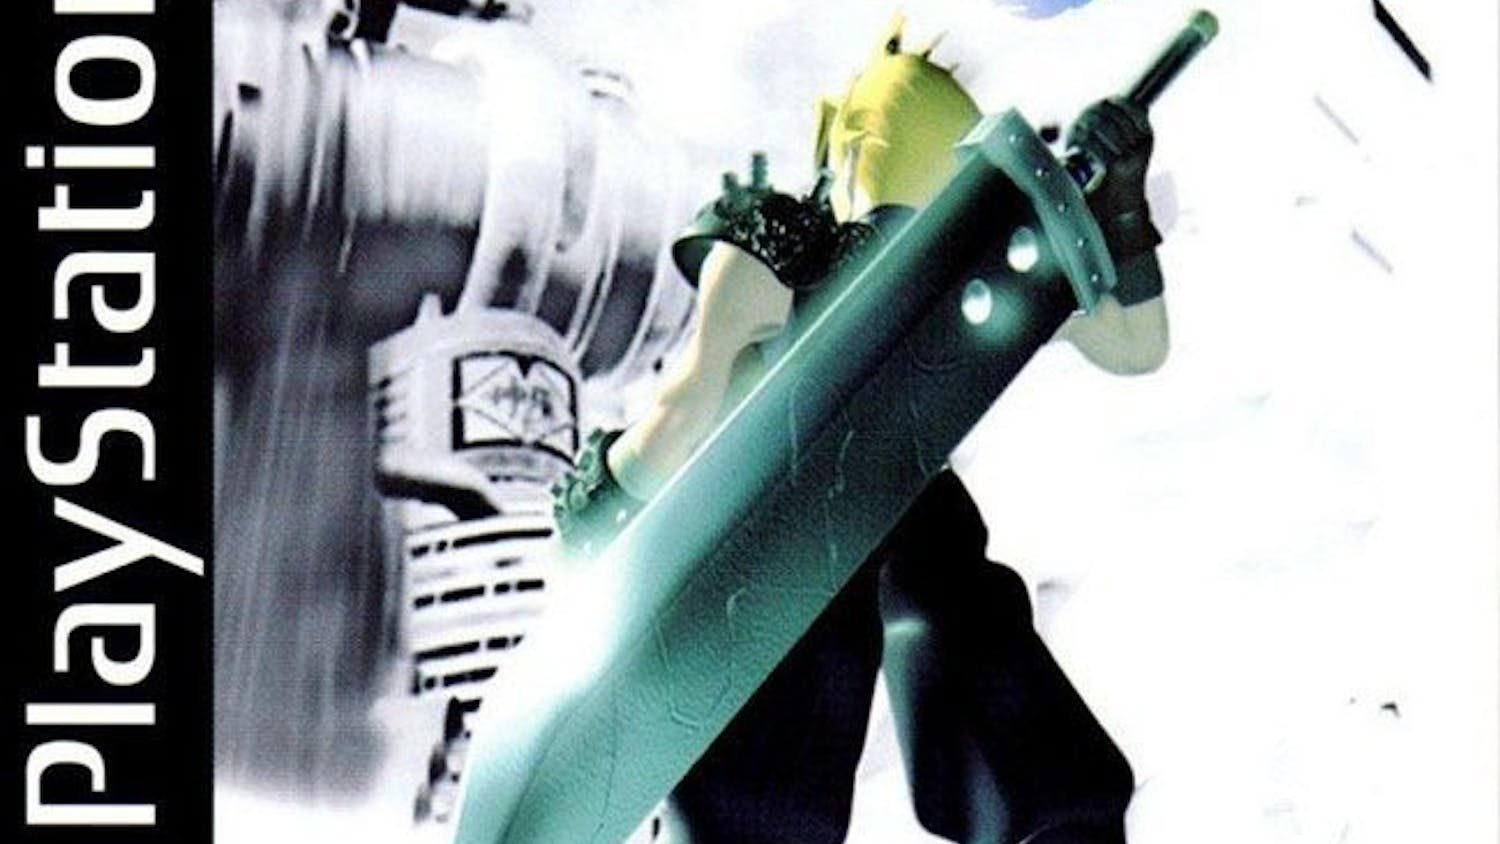 "Final Fantasy VII" was released in 1997 for the PlayStation.